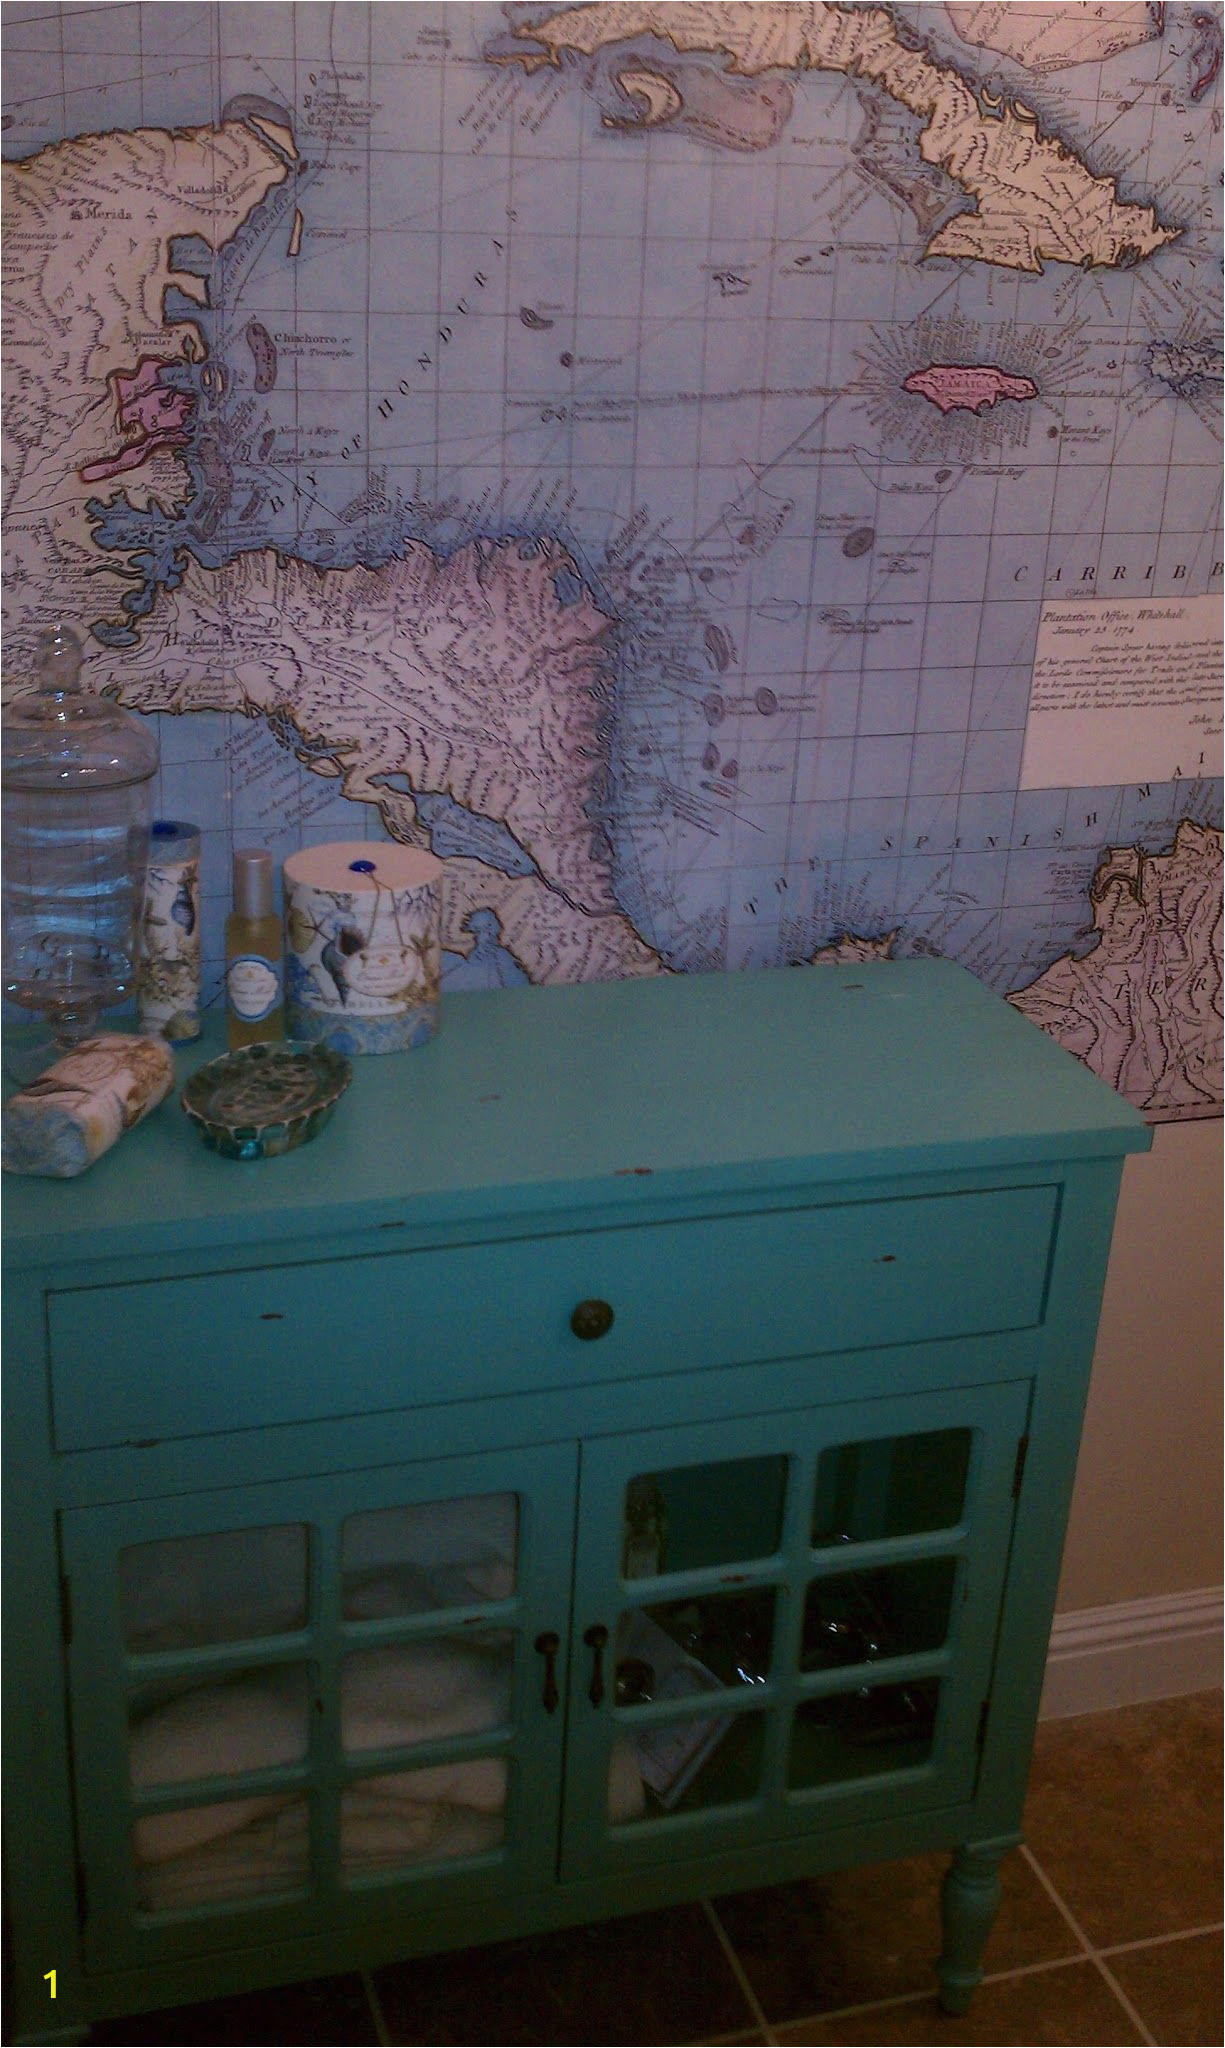 Pottery Barn Kids World Map Wall Mural 1770 S Caribbean theme Map Wall Decal Pottery Barn $129 In